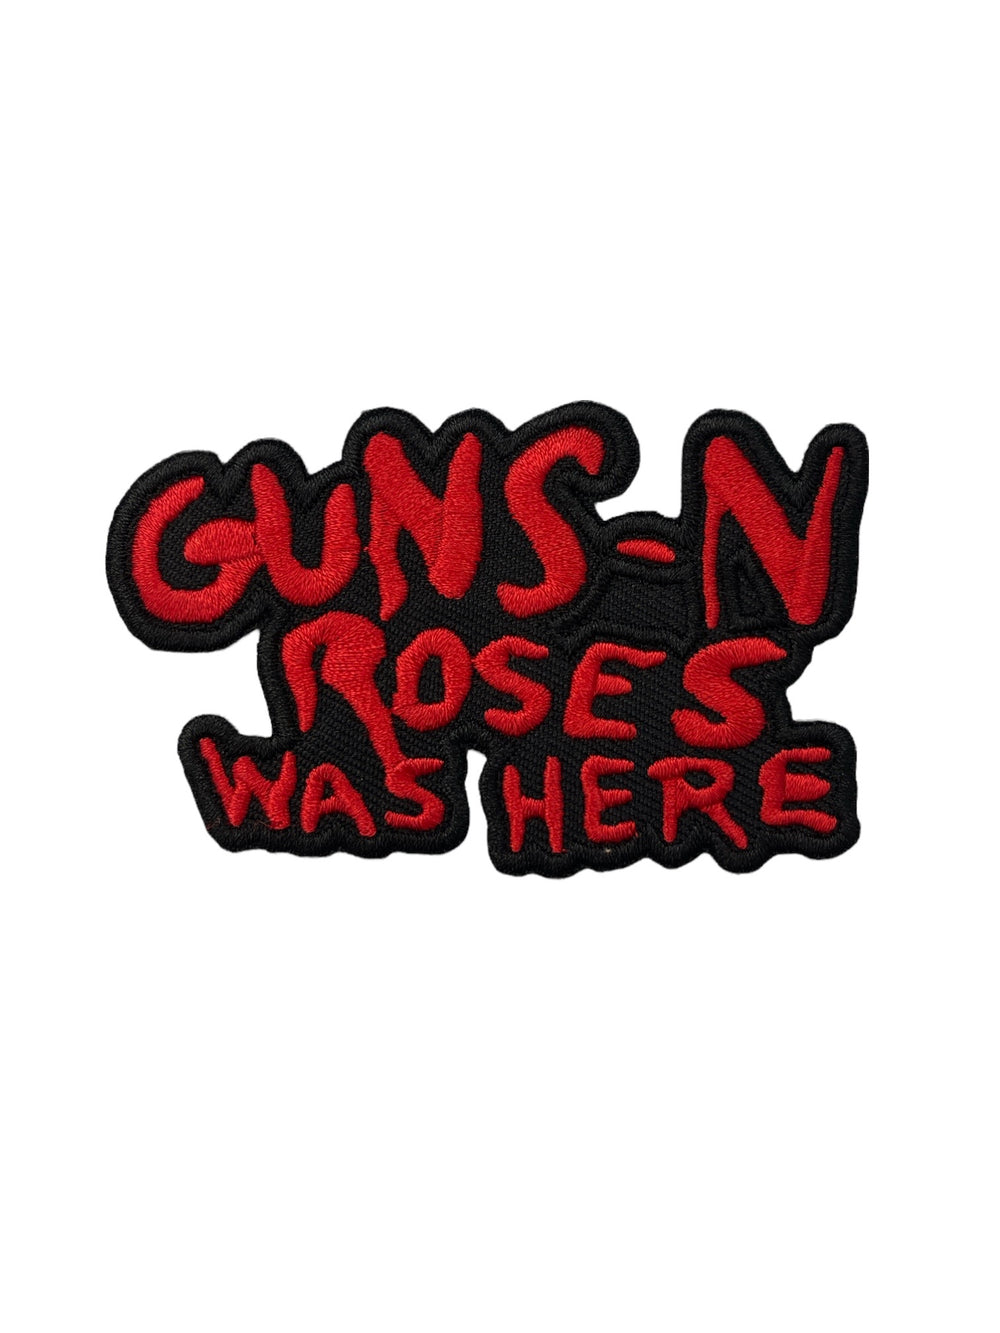 Guns N' Roses Standard Patch: Cut-Out Was Here Official Woven Patch Brand New